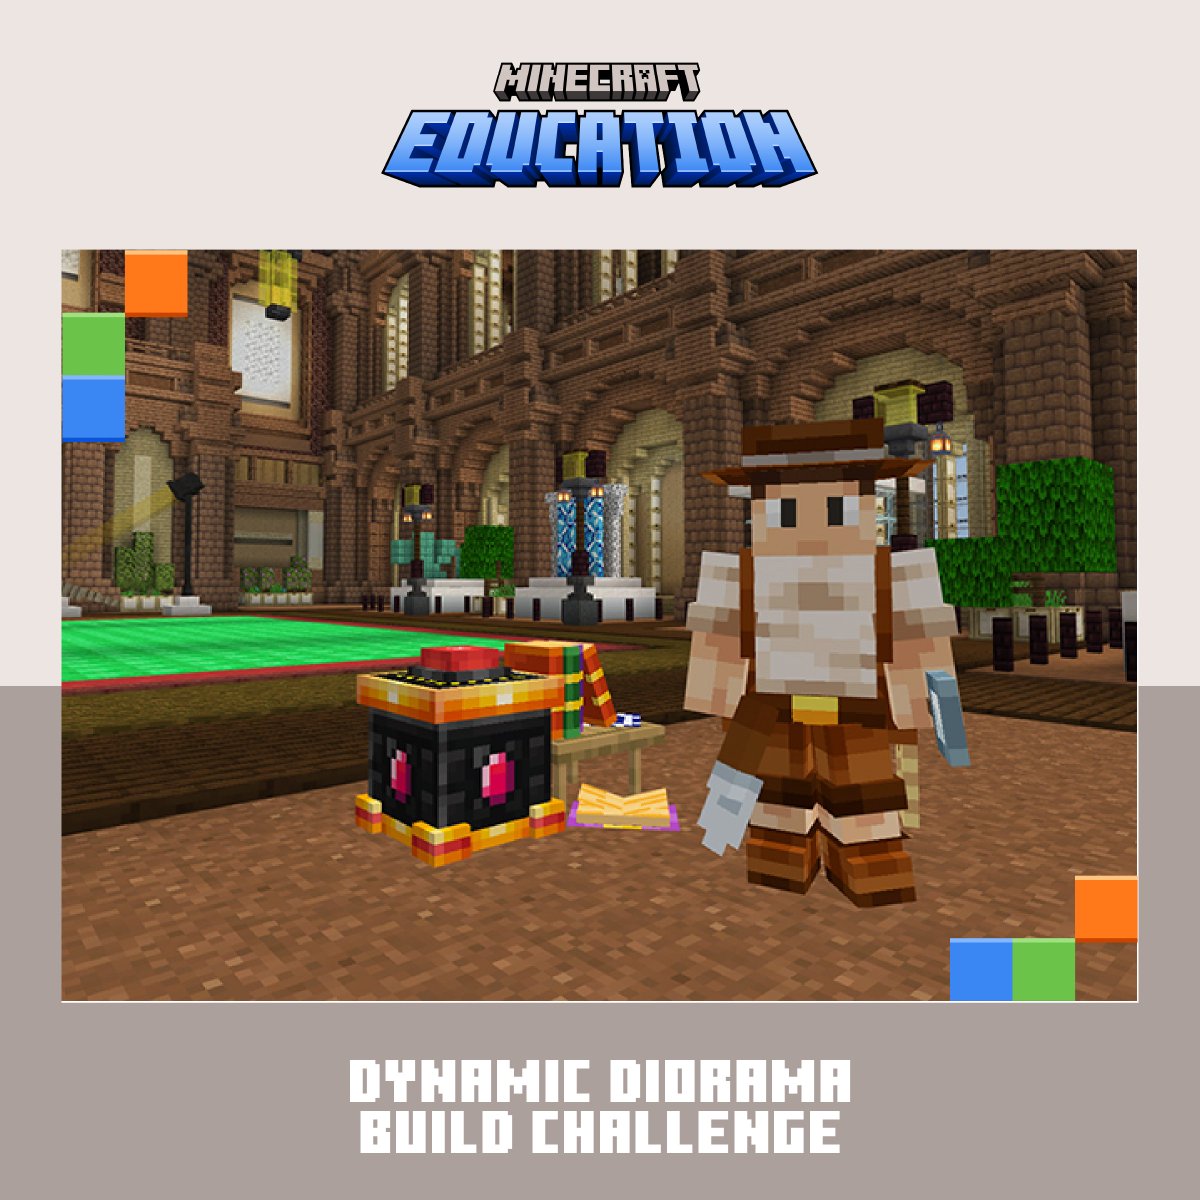 Challenge your students to let their creativity shine with this #MinecraftEdu activity.☀️ Their task is to design a museum diorama, but what will they create? Dinosaurs? Astronauts? The possibilities are endless! Learn more at: msft.it/6019cZCDN